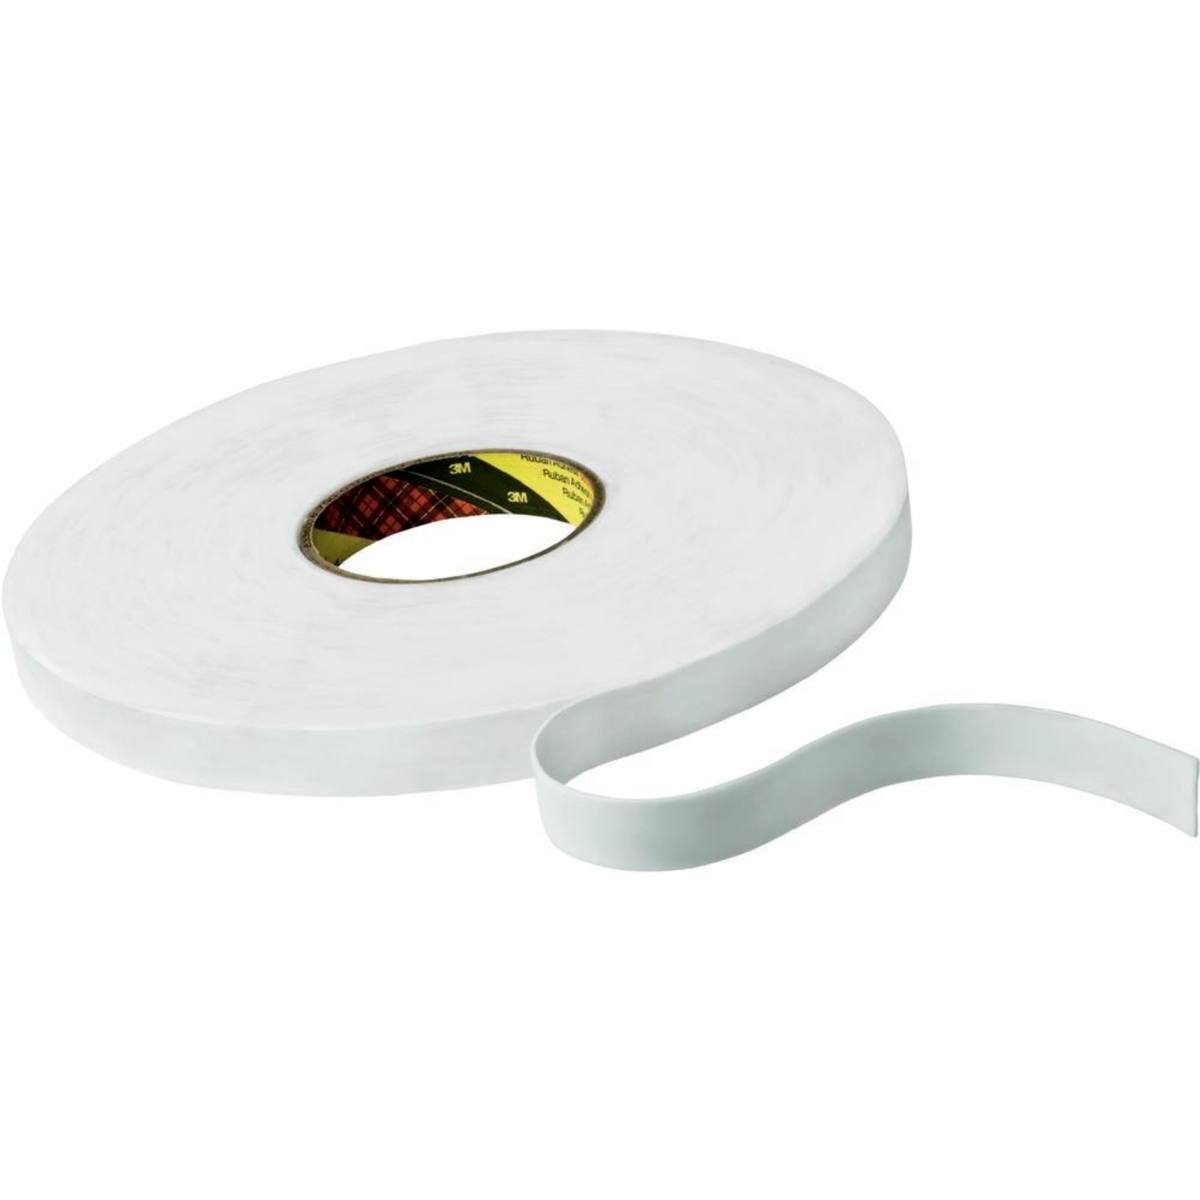 3M Double-sided PE foam tape with acrylic adhesive 9508W, white, 25 mm x 66 m, 0.8 mm